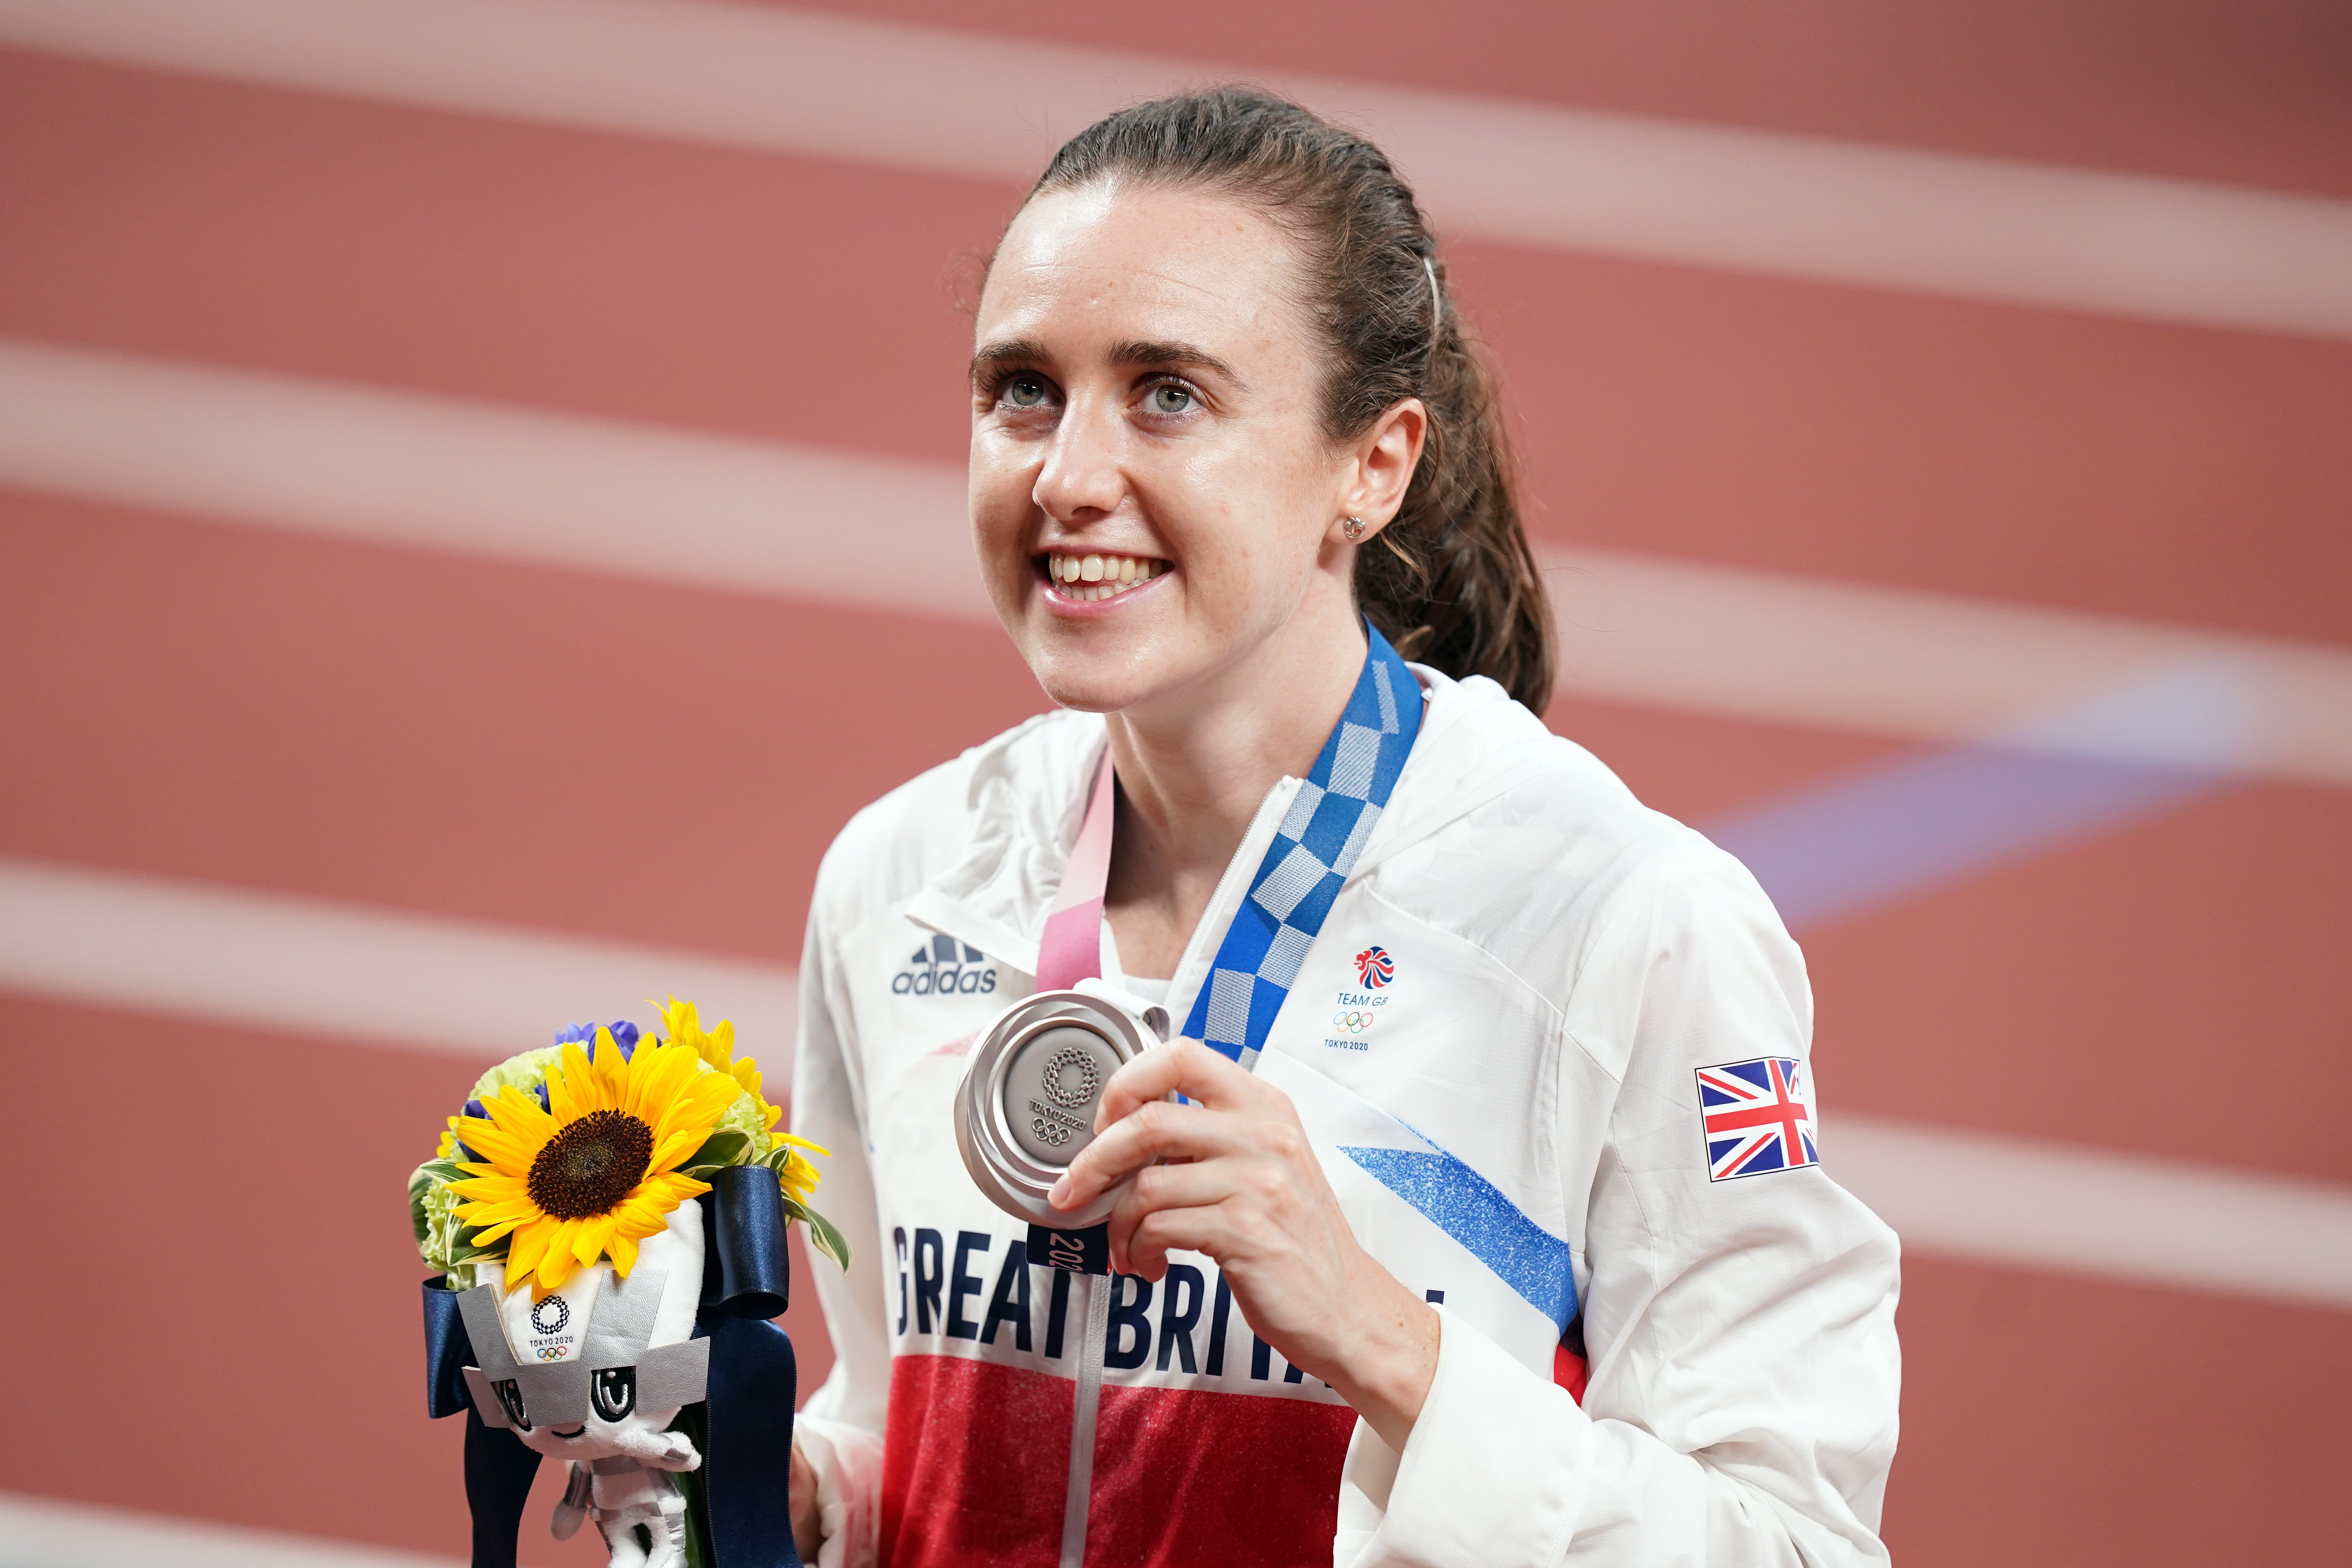 Great Britain’s Laura Muir with the silver medal after the women’s 1500m final.